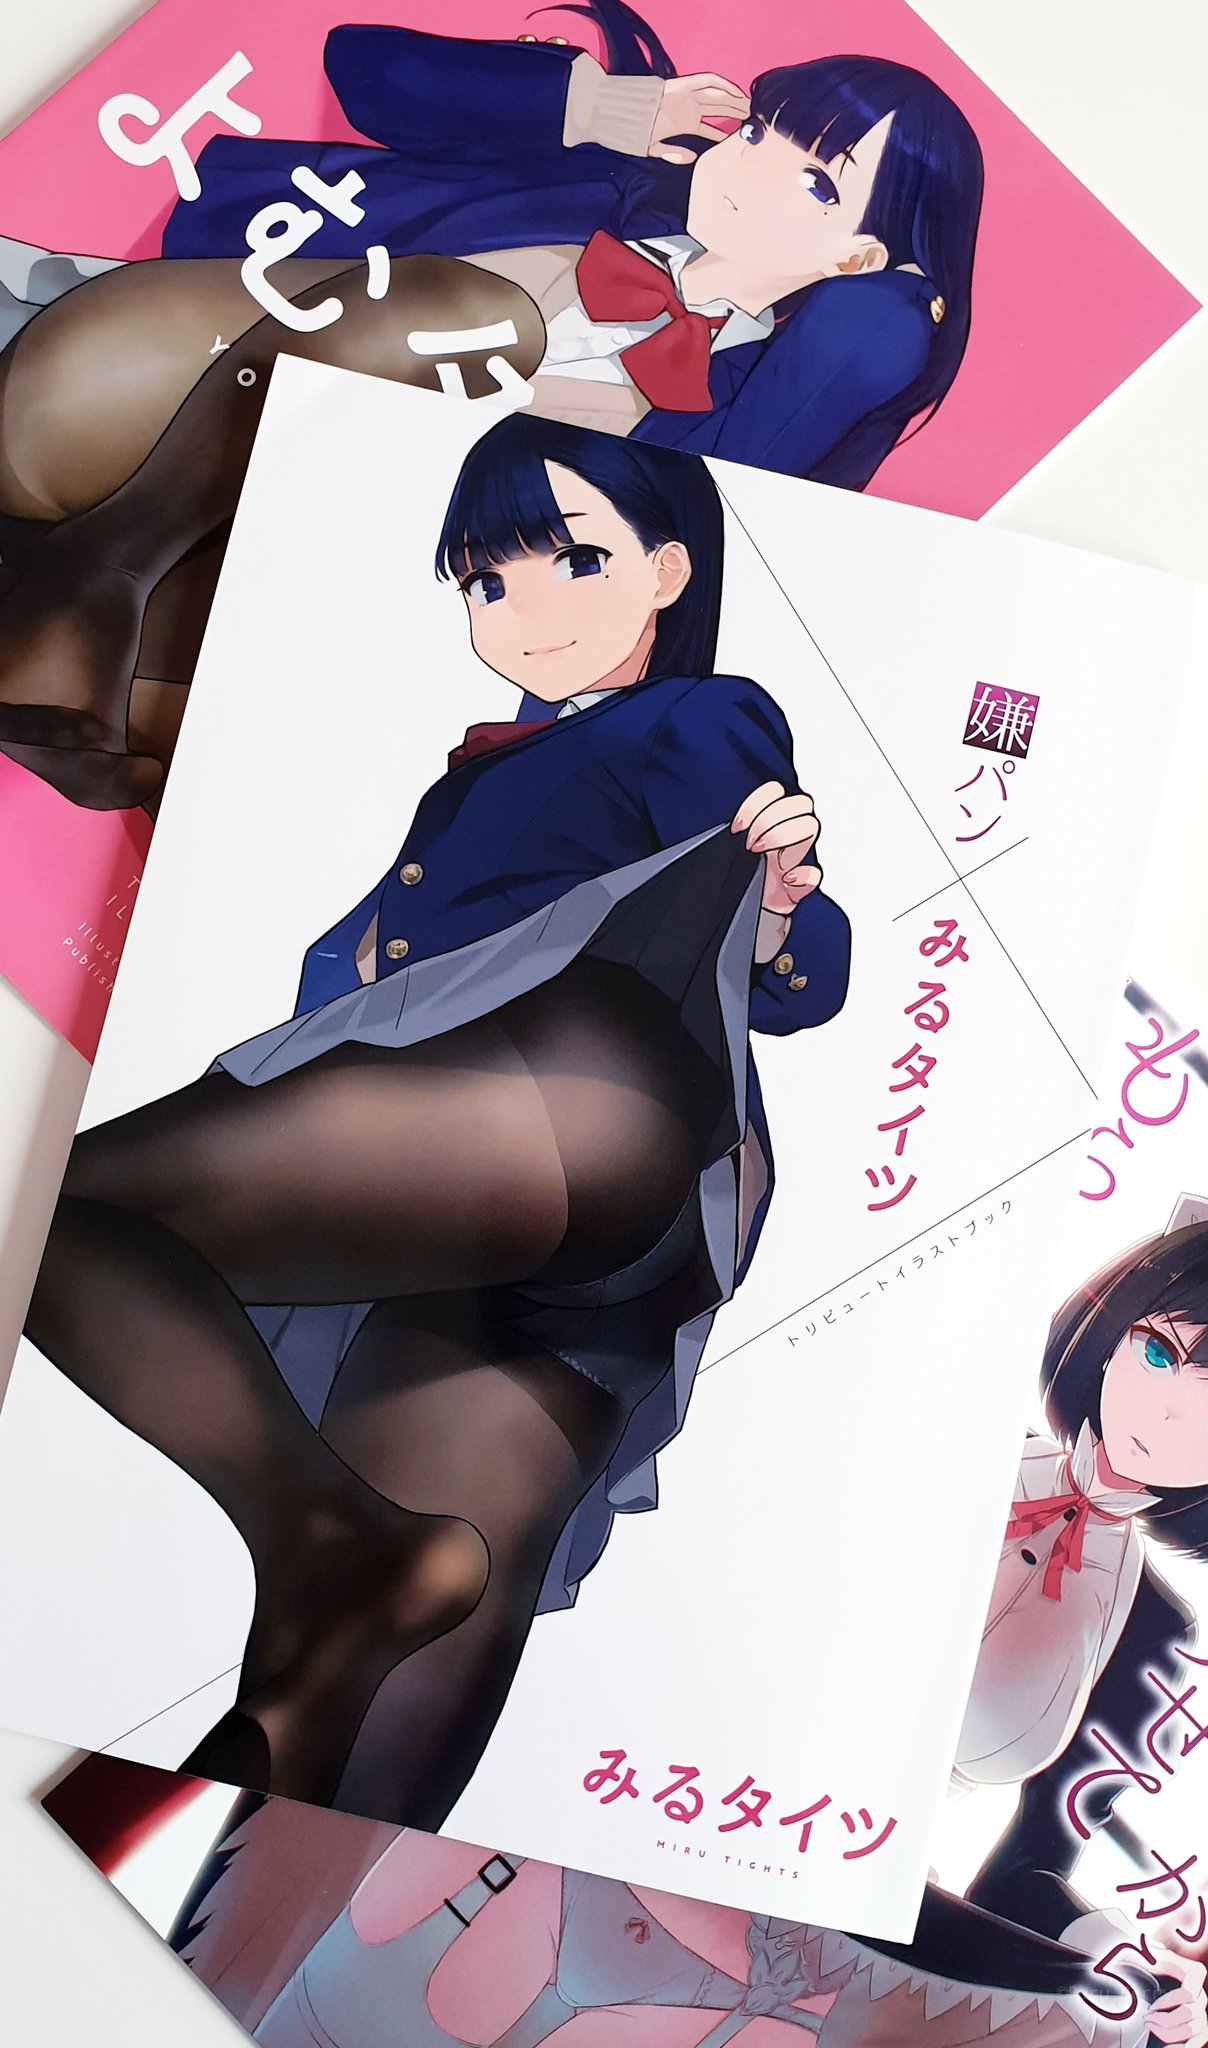 The Girls from Miru Tights Get Featured in a Poster!